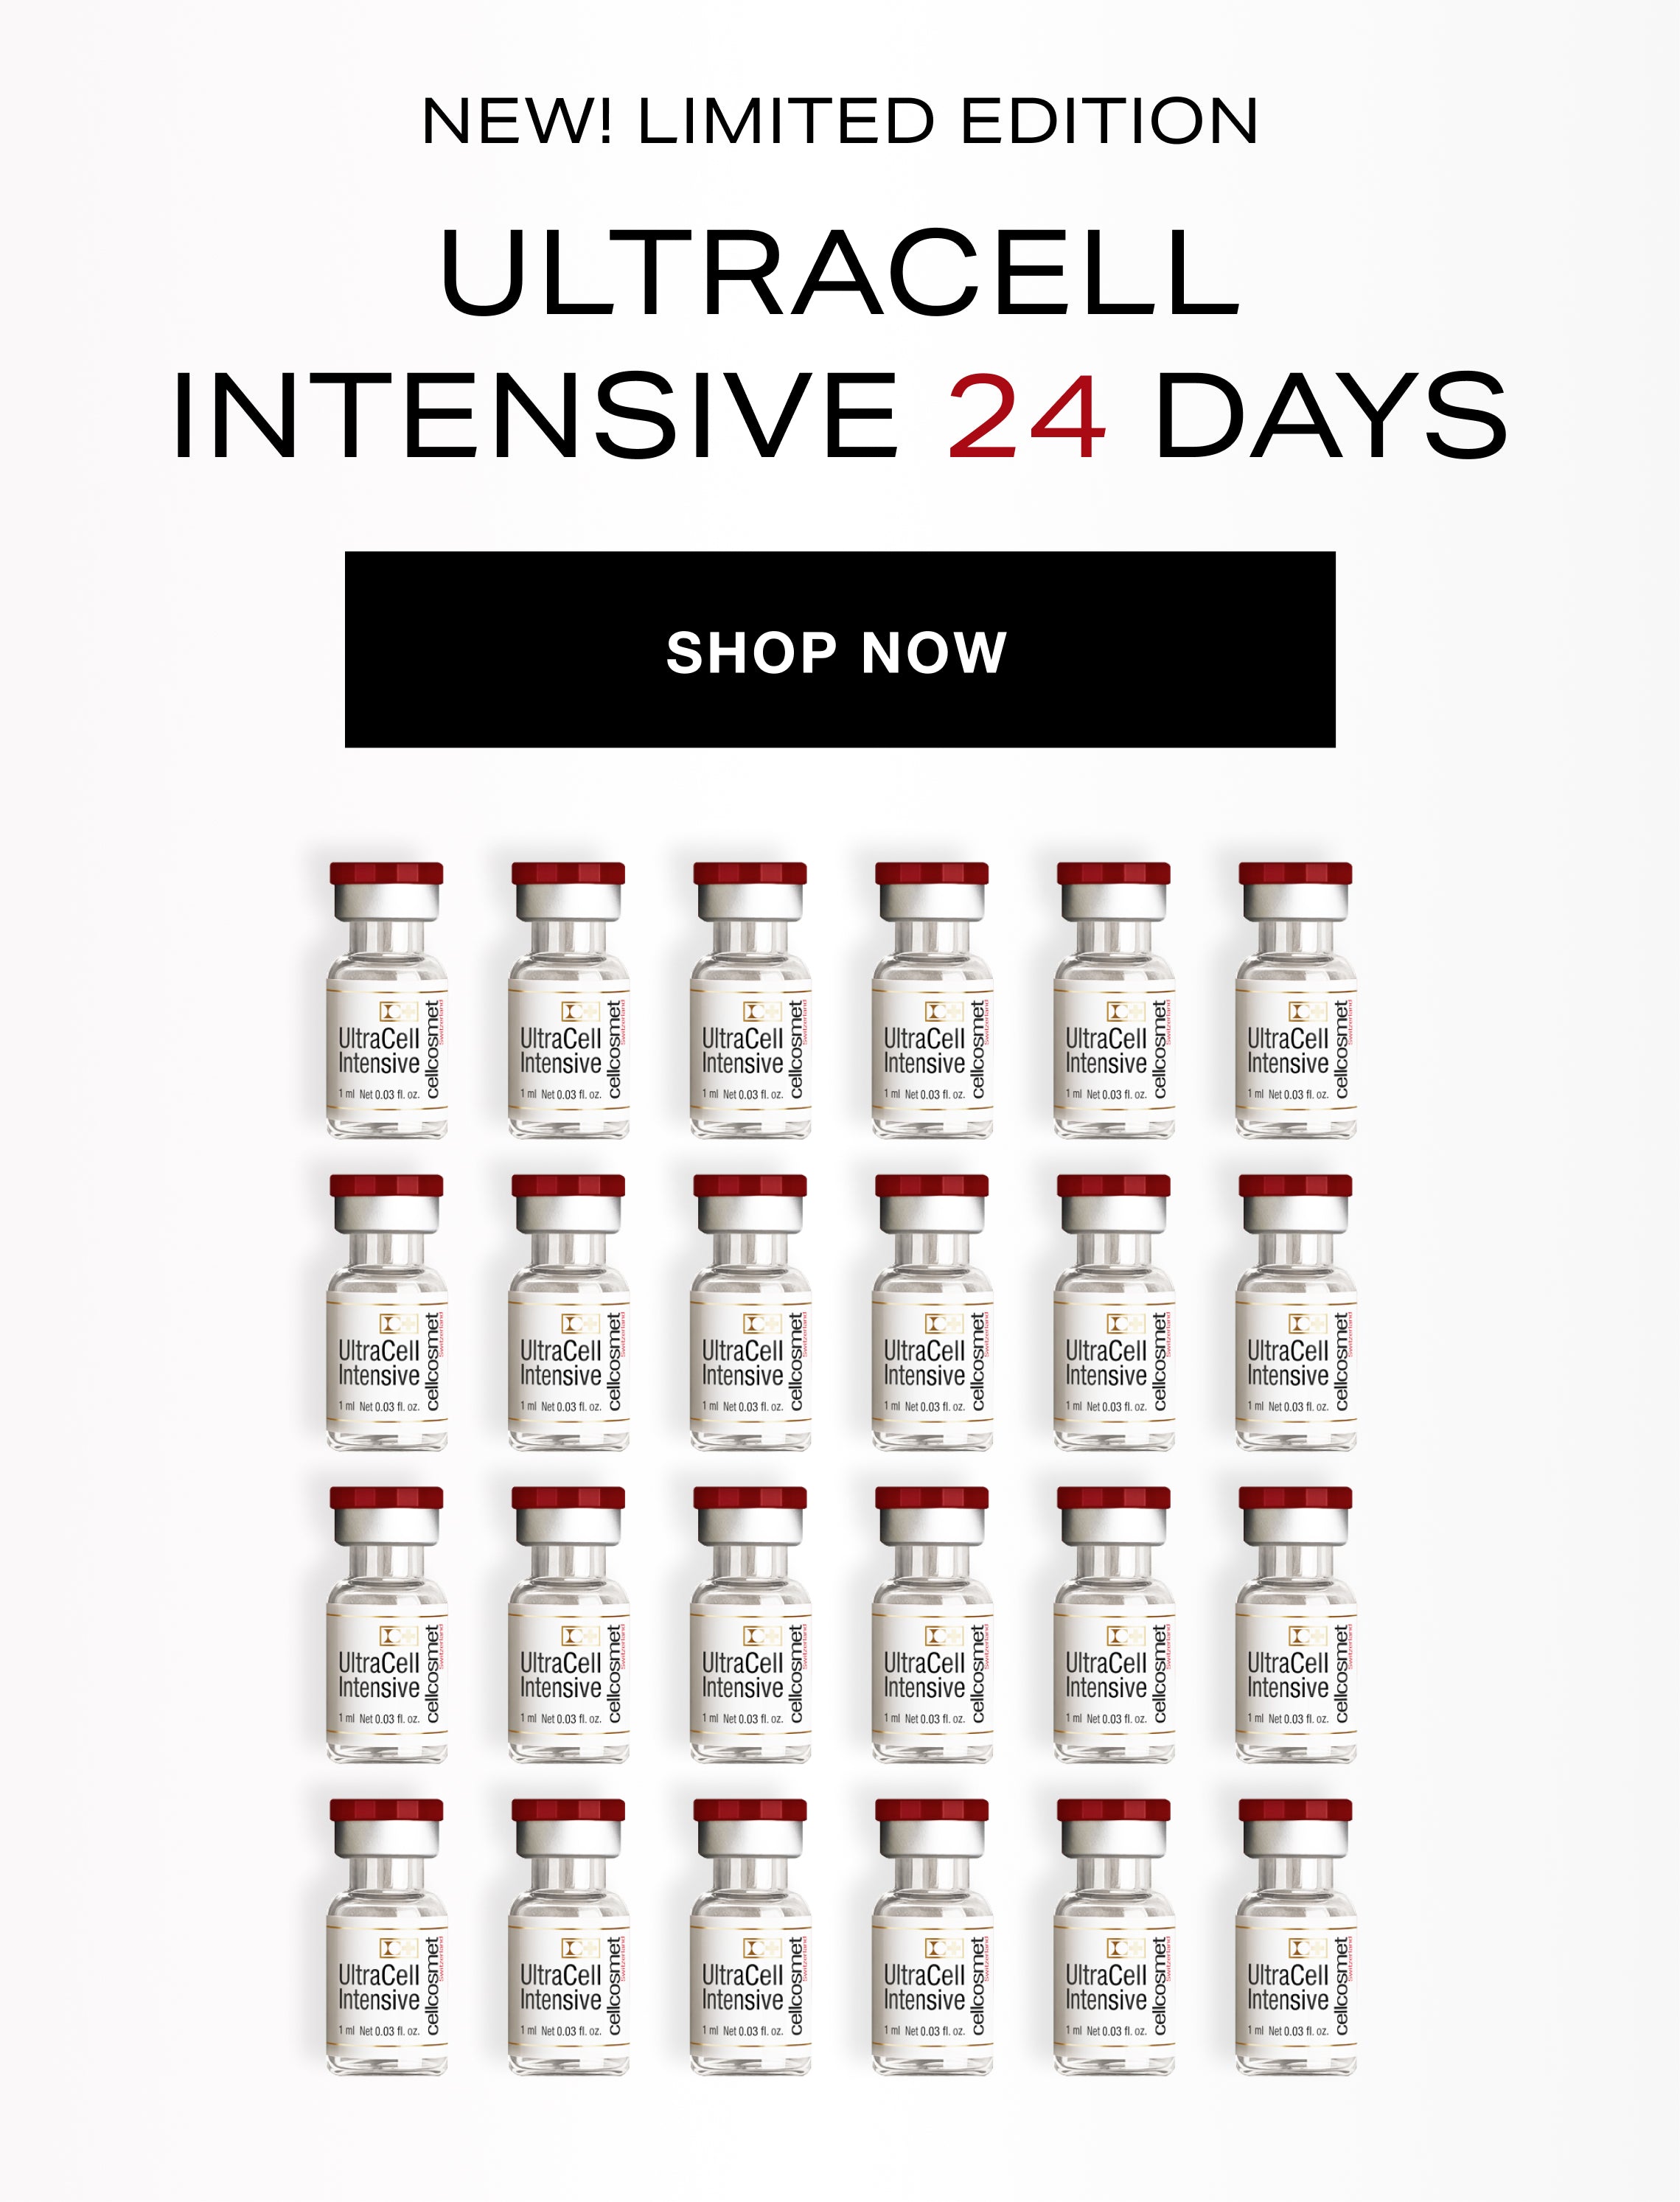 Ultracell Intensive 24 Days